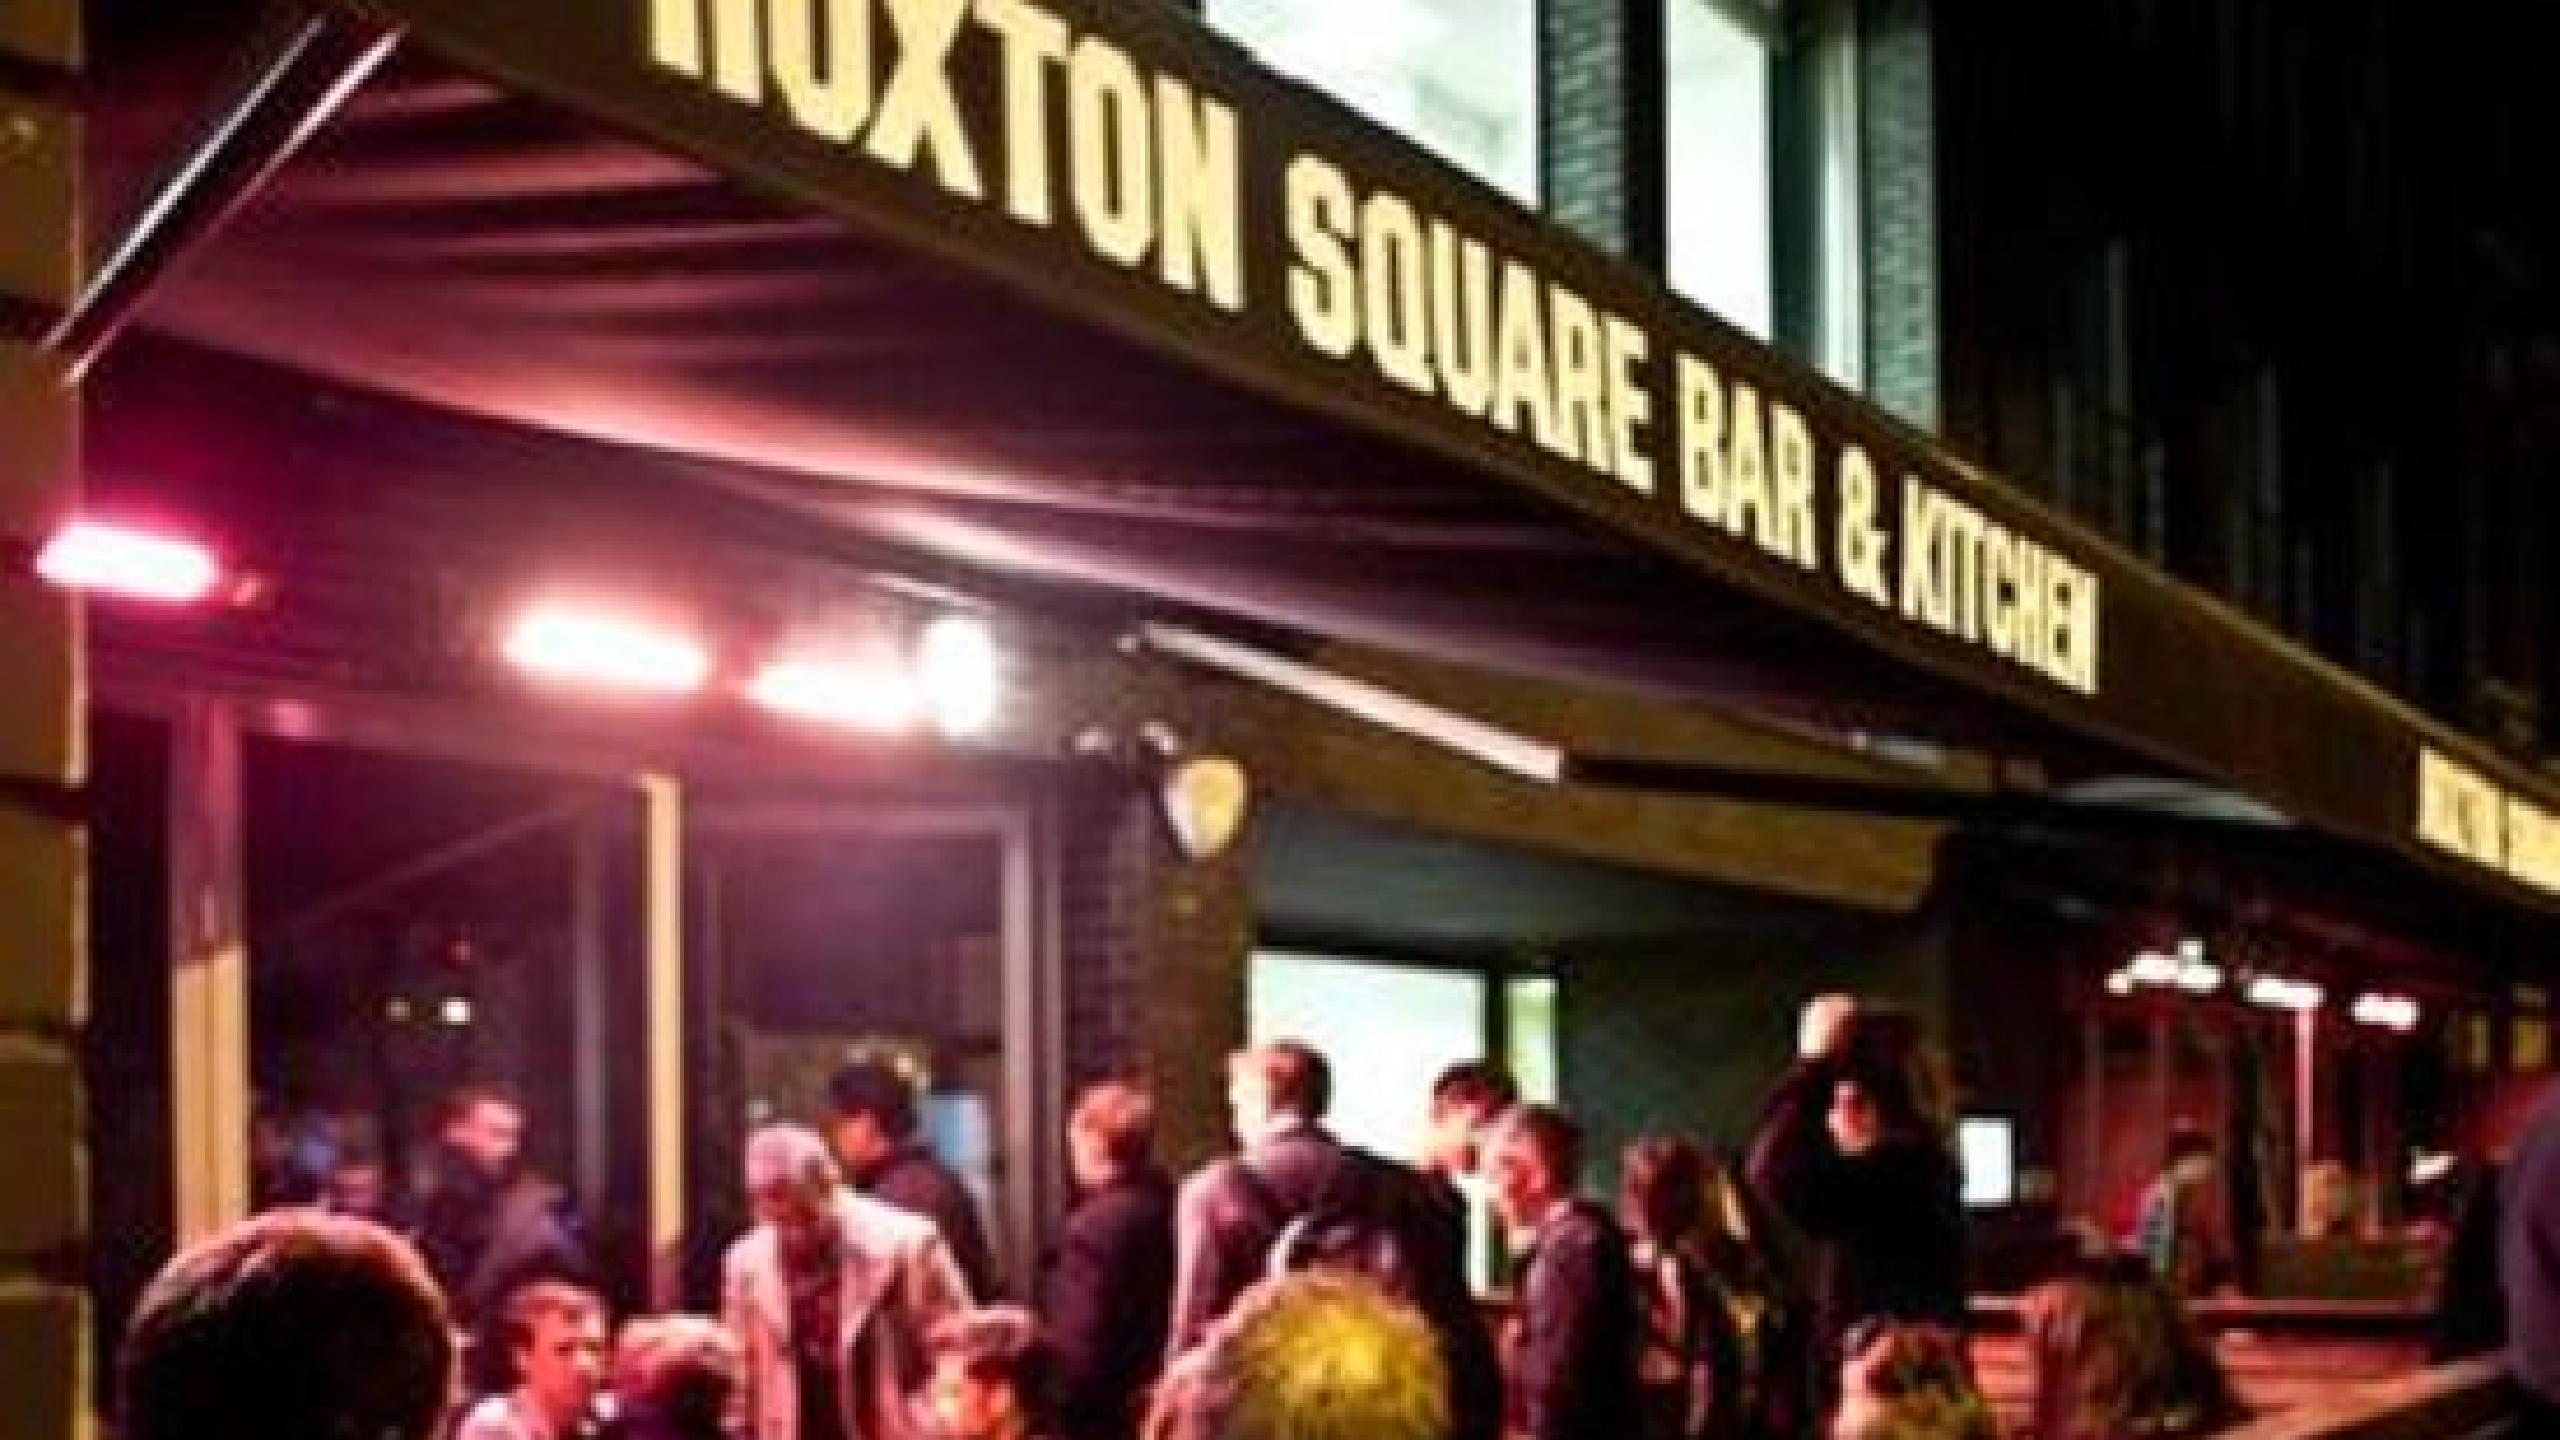 hoxton square bar and kitchen n1 6nu